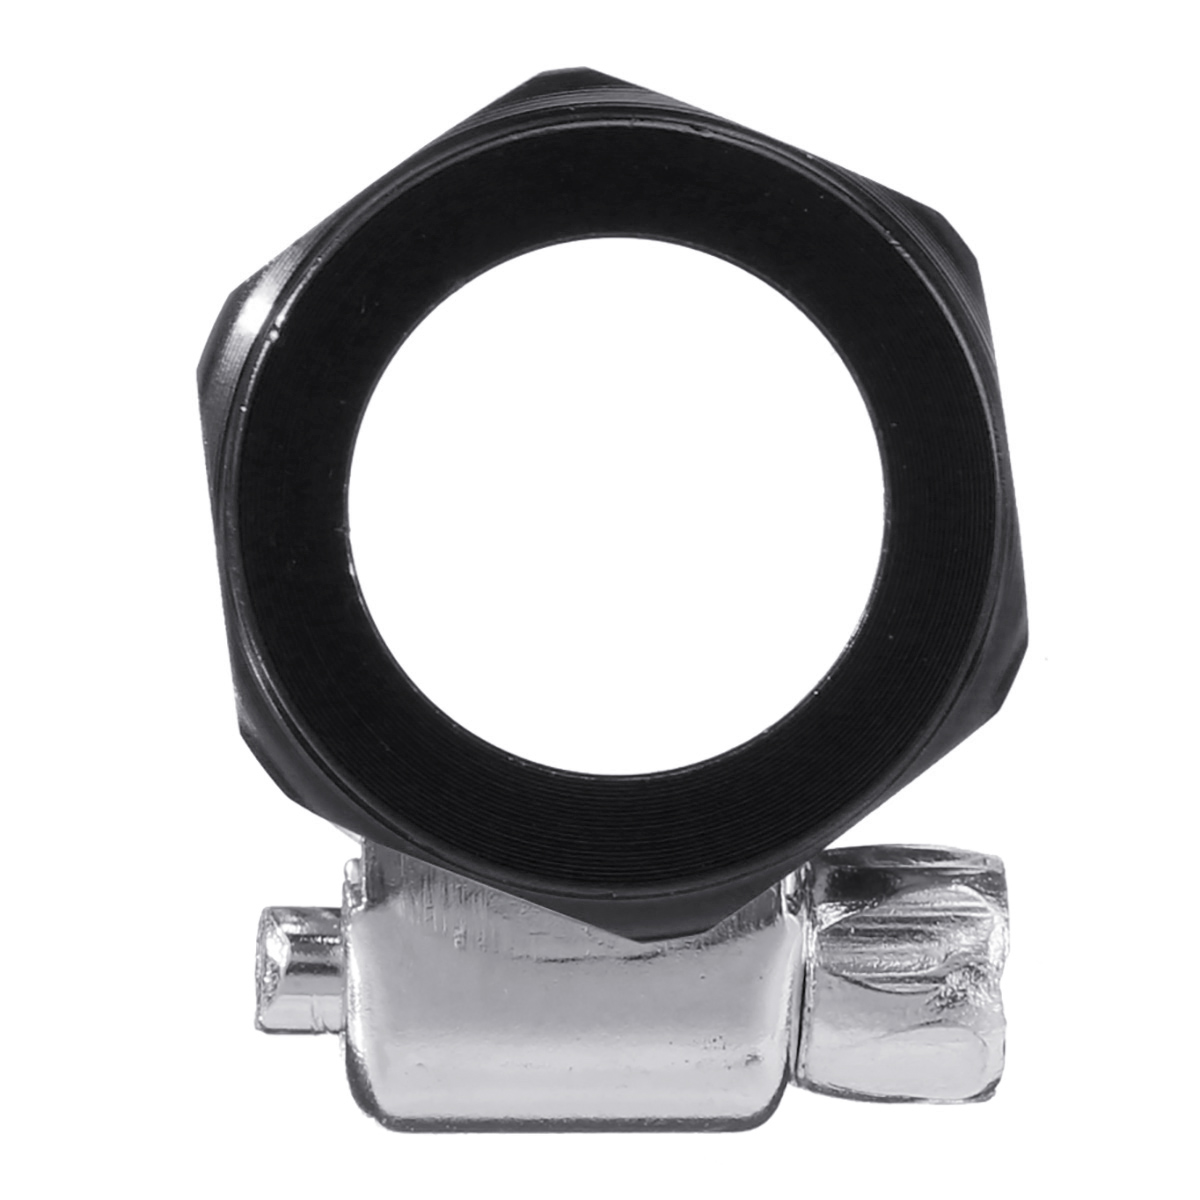 AN6 Hex Hose Finisher Clamp with Screw Band Hose End Cover Fitting Adapter Connector - Auto GoShop